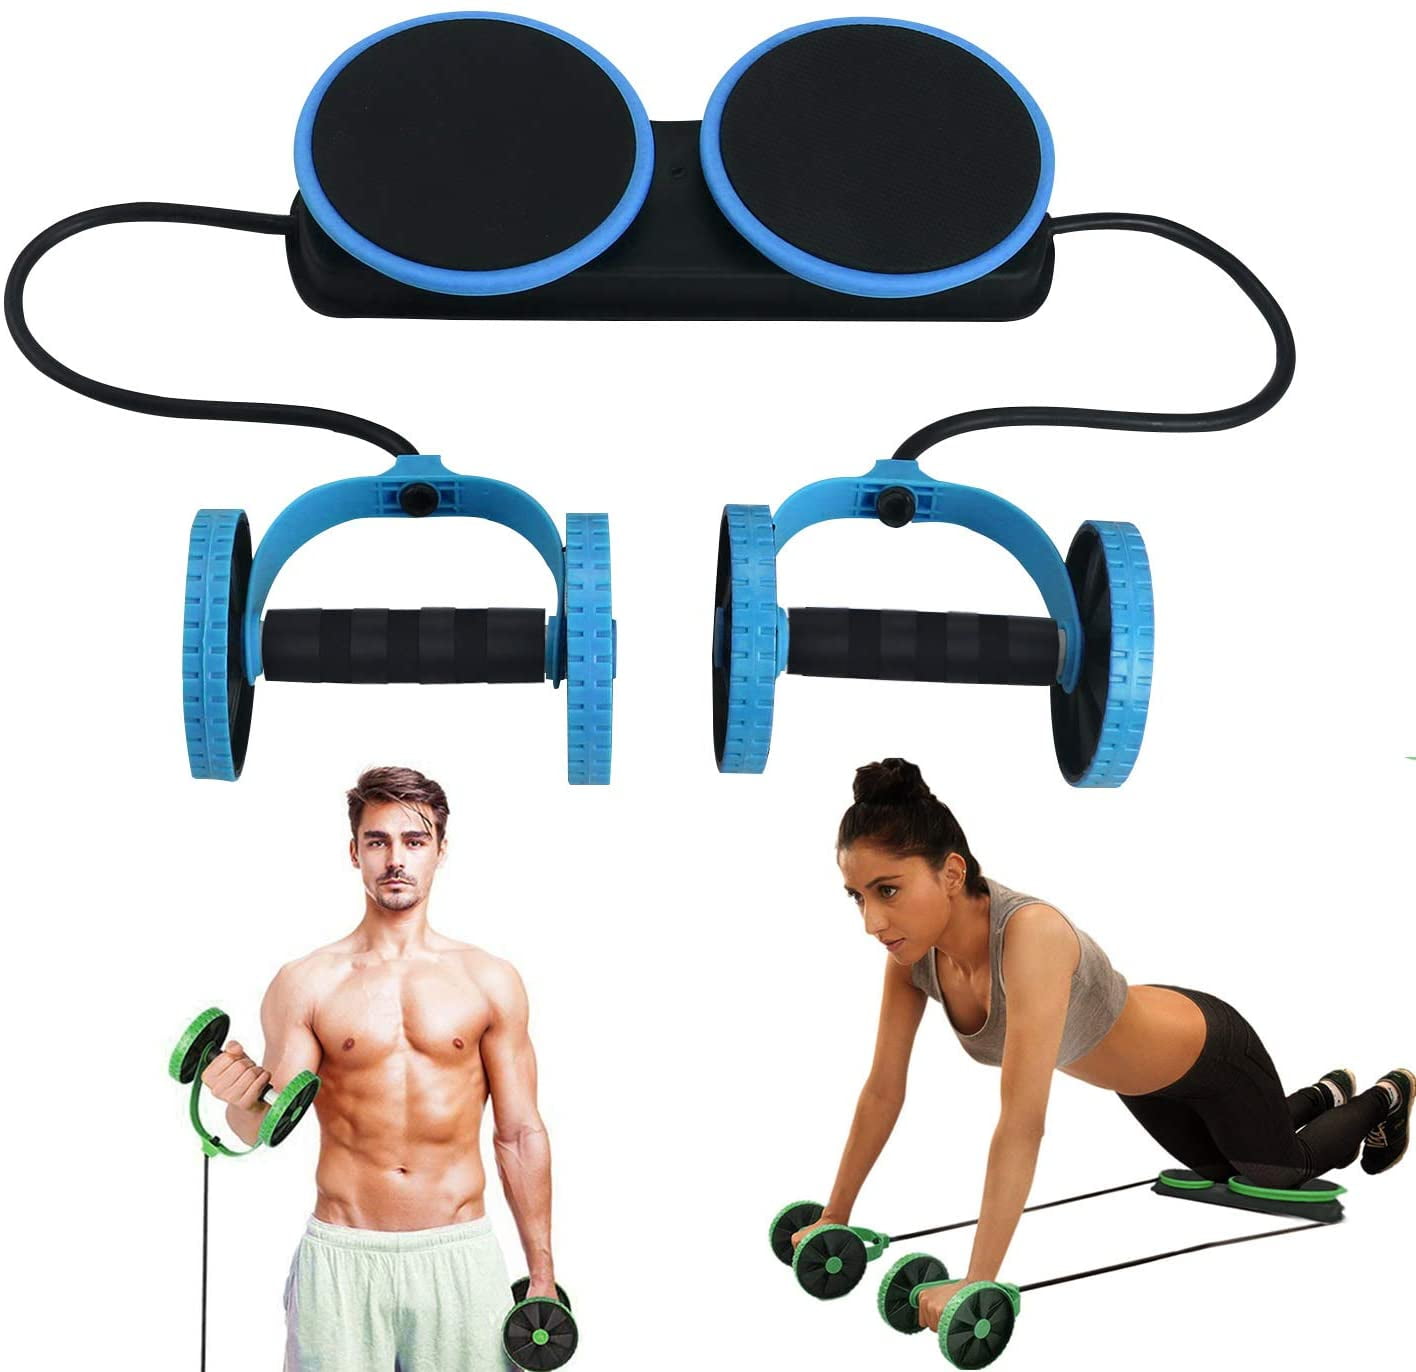 Dual Ab Wheel for Abs Abdominal Roller Workout Exercise Fitness Blue、2018 